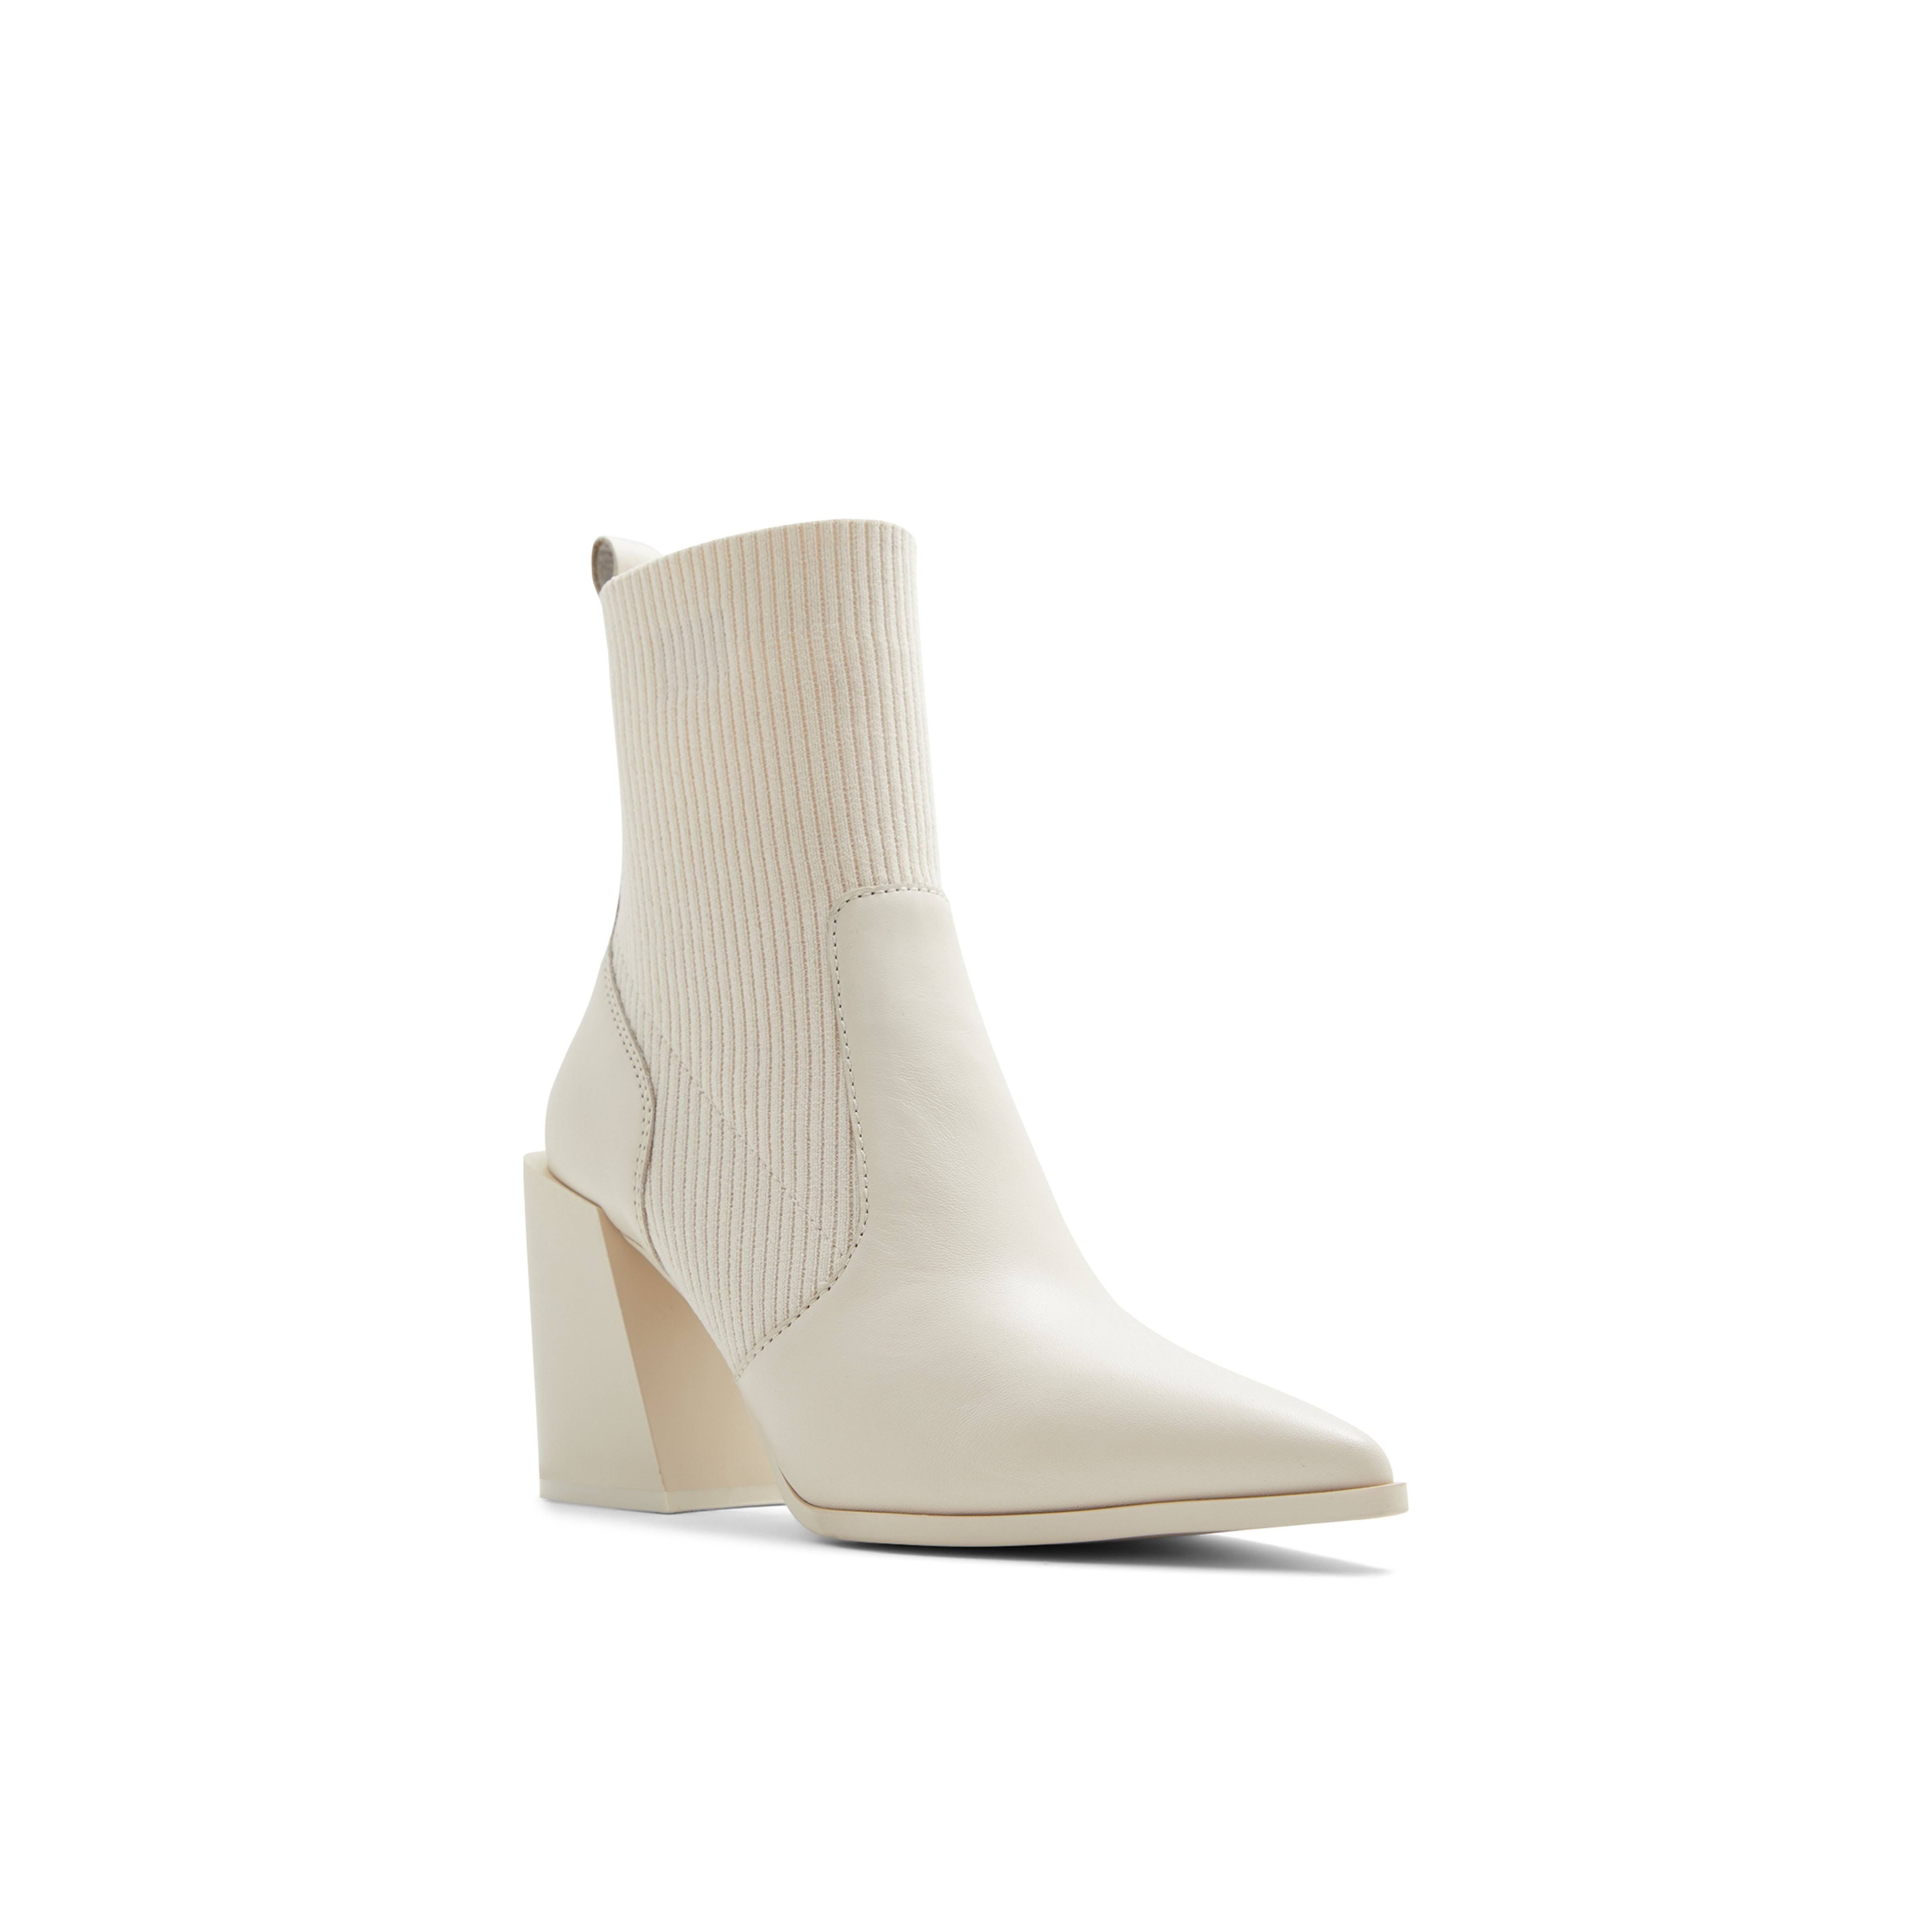 Fashionable White Booties for Women | Image